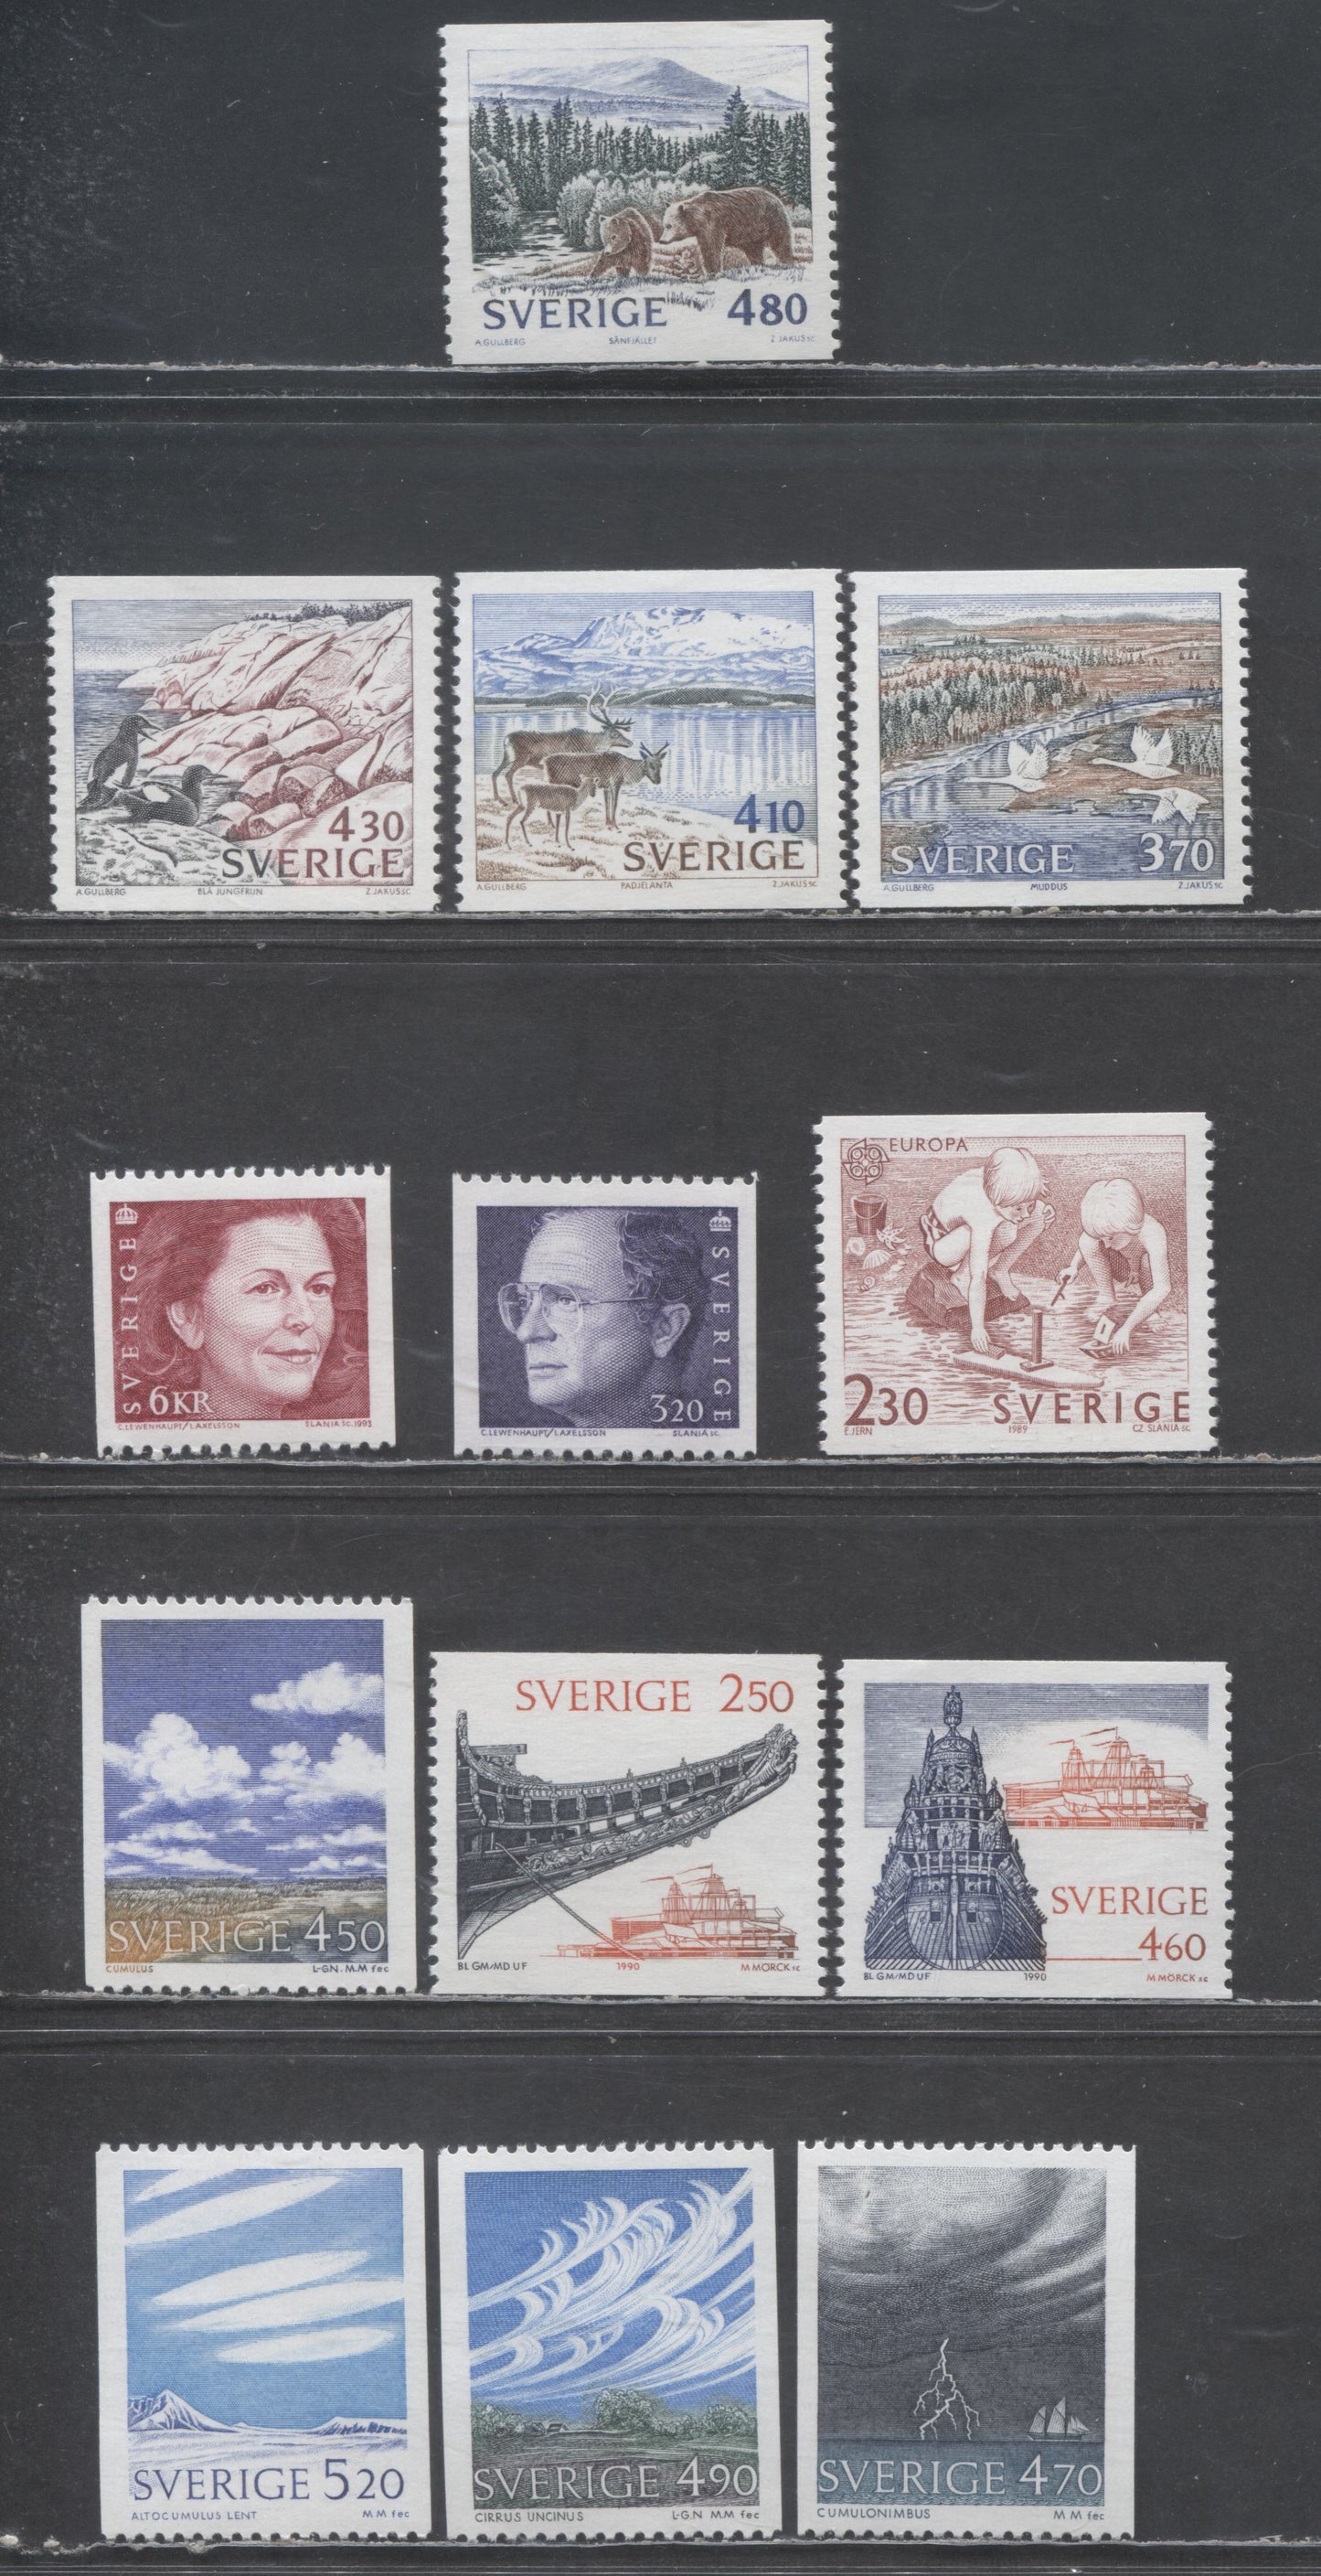 Lot 73 Sweden SC#1736/1848 1990 National Parks Issue - 1990 Clouds Issue, With Control Numbers On Back, 13 VFNH Singles, Click on Listing to See ALL Pictures, Estimated Value $35